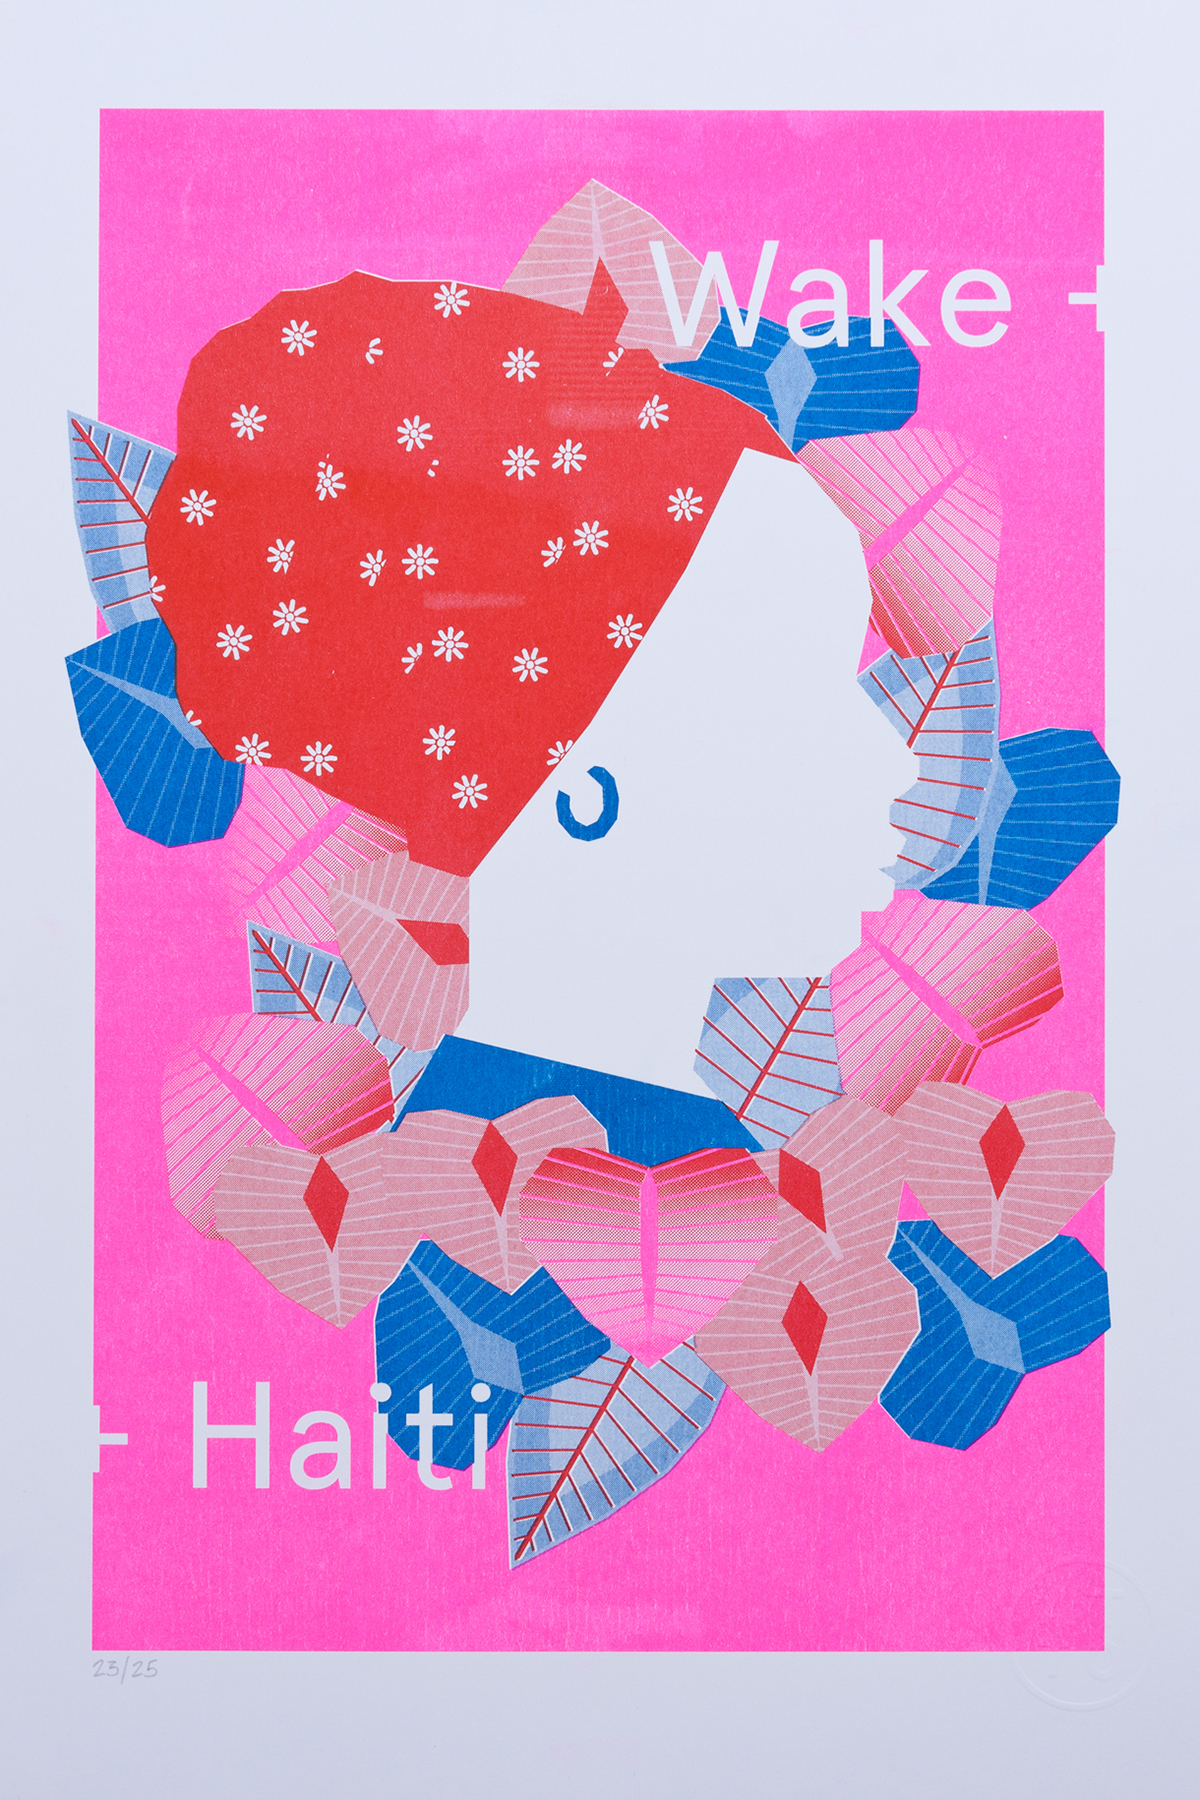 Haiti leafs charity profile silouette risograph printing risograph fluo pink blue red